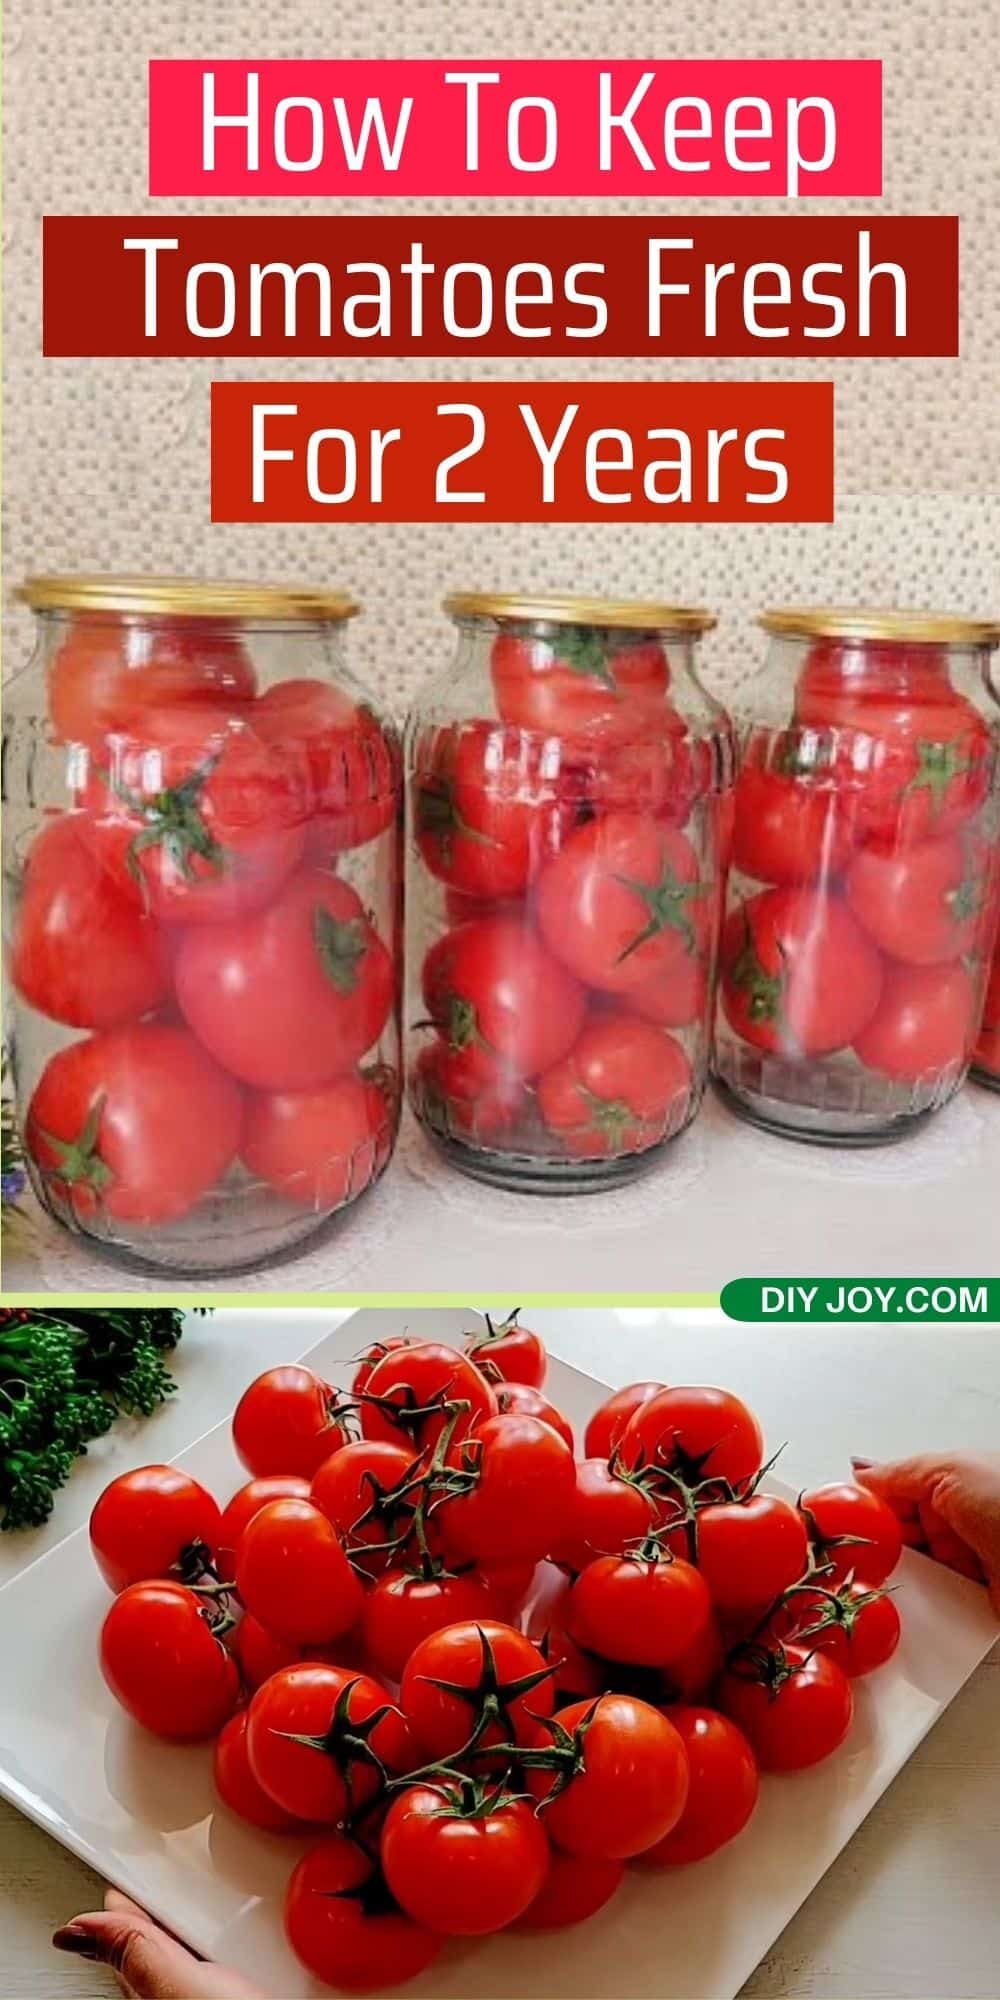 How To Keep Tomatoes Fresh For 2 Years -Kitchen Hacks DIY